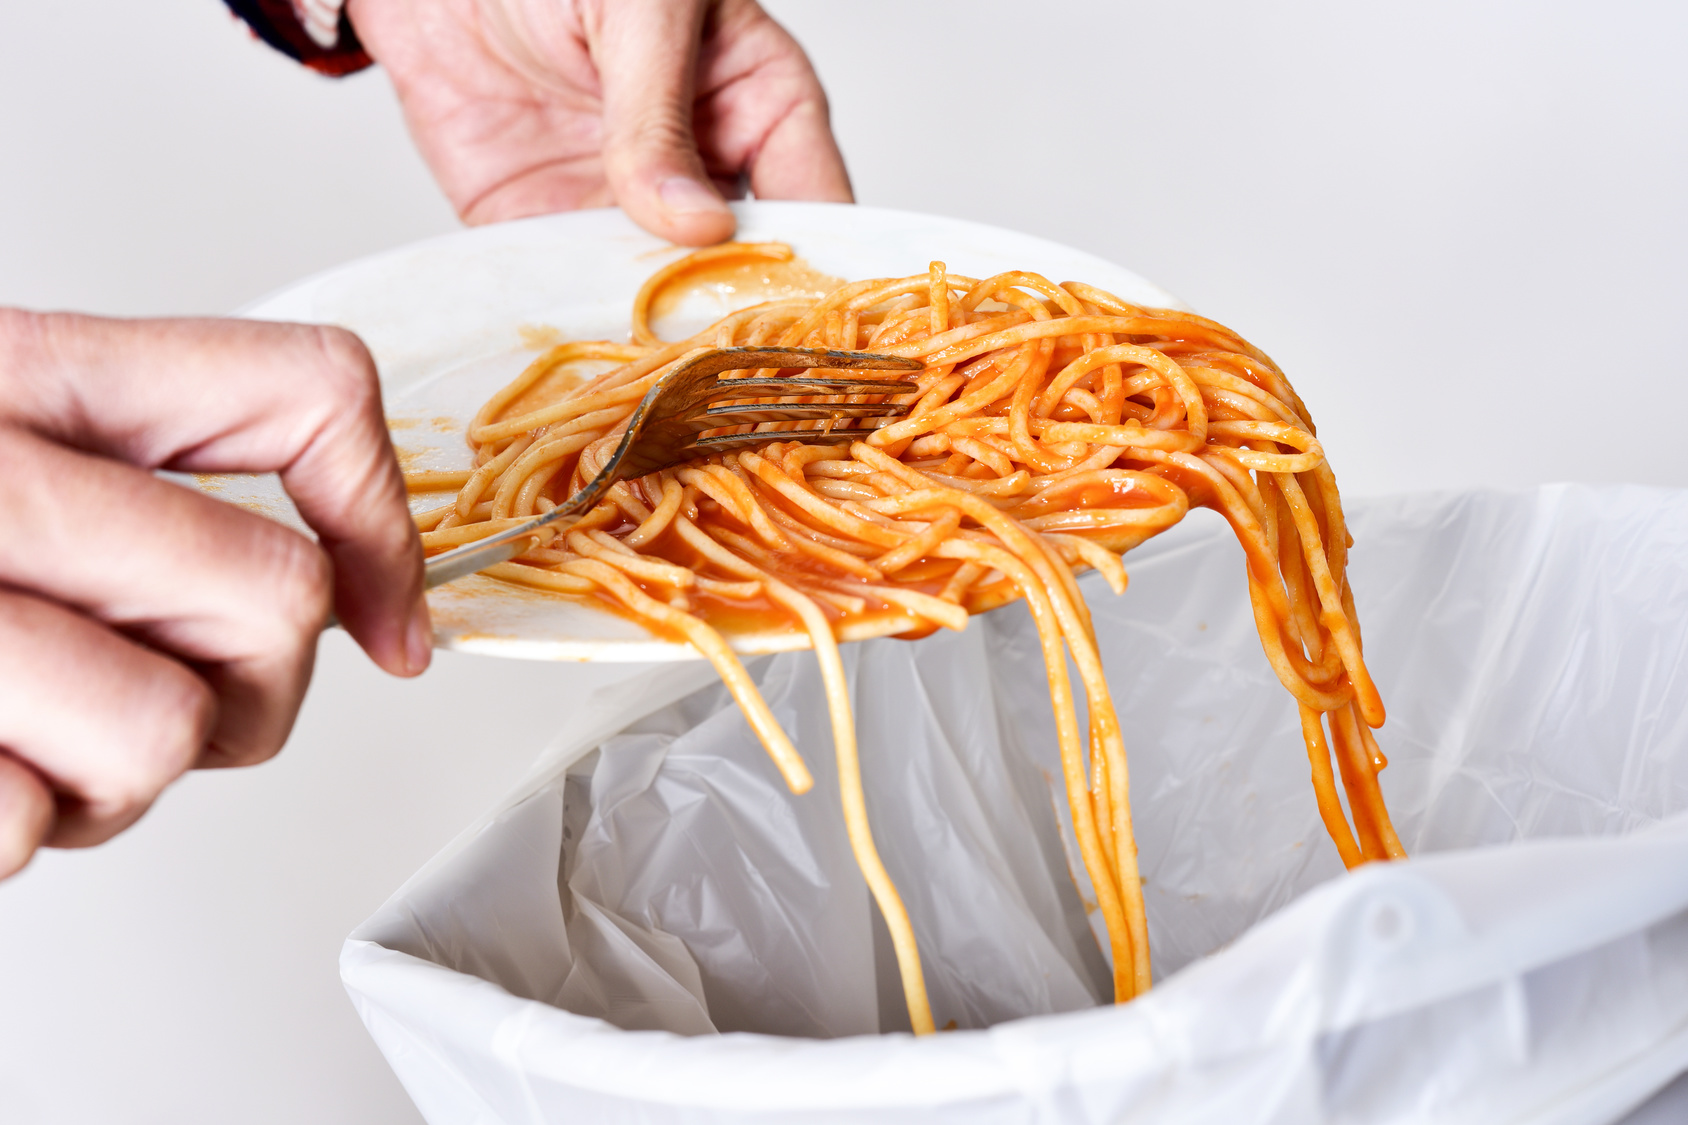 closeup of a young man throwing the leftover of a plate of spaghetti to the trash bin